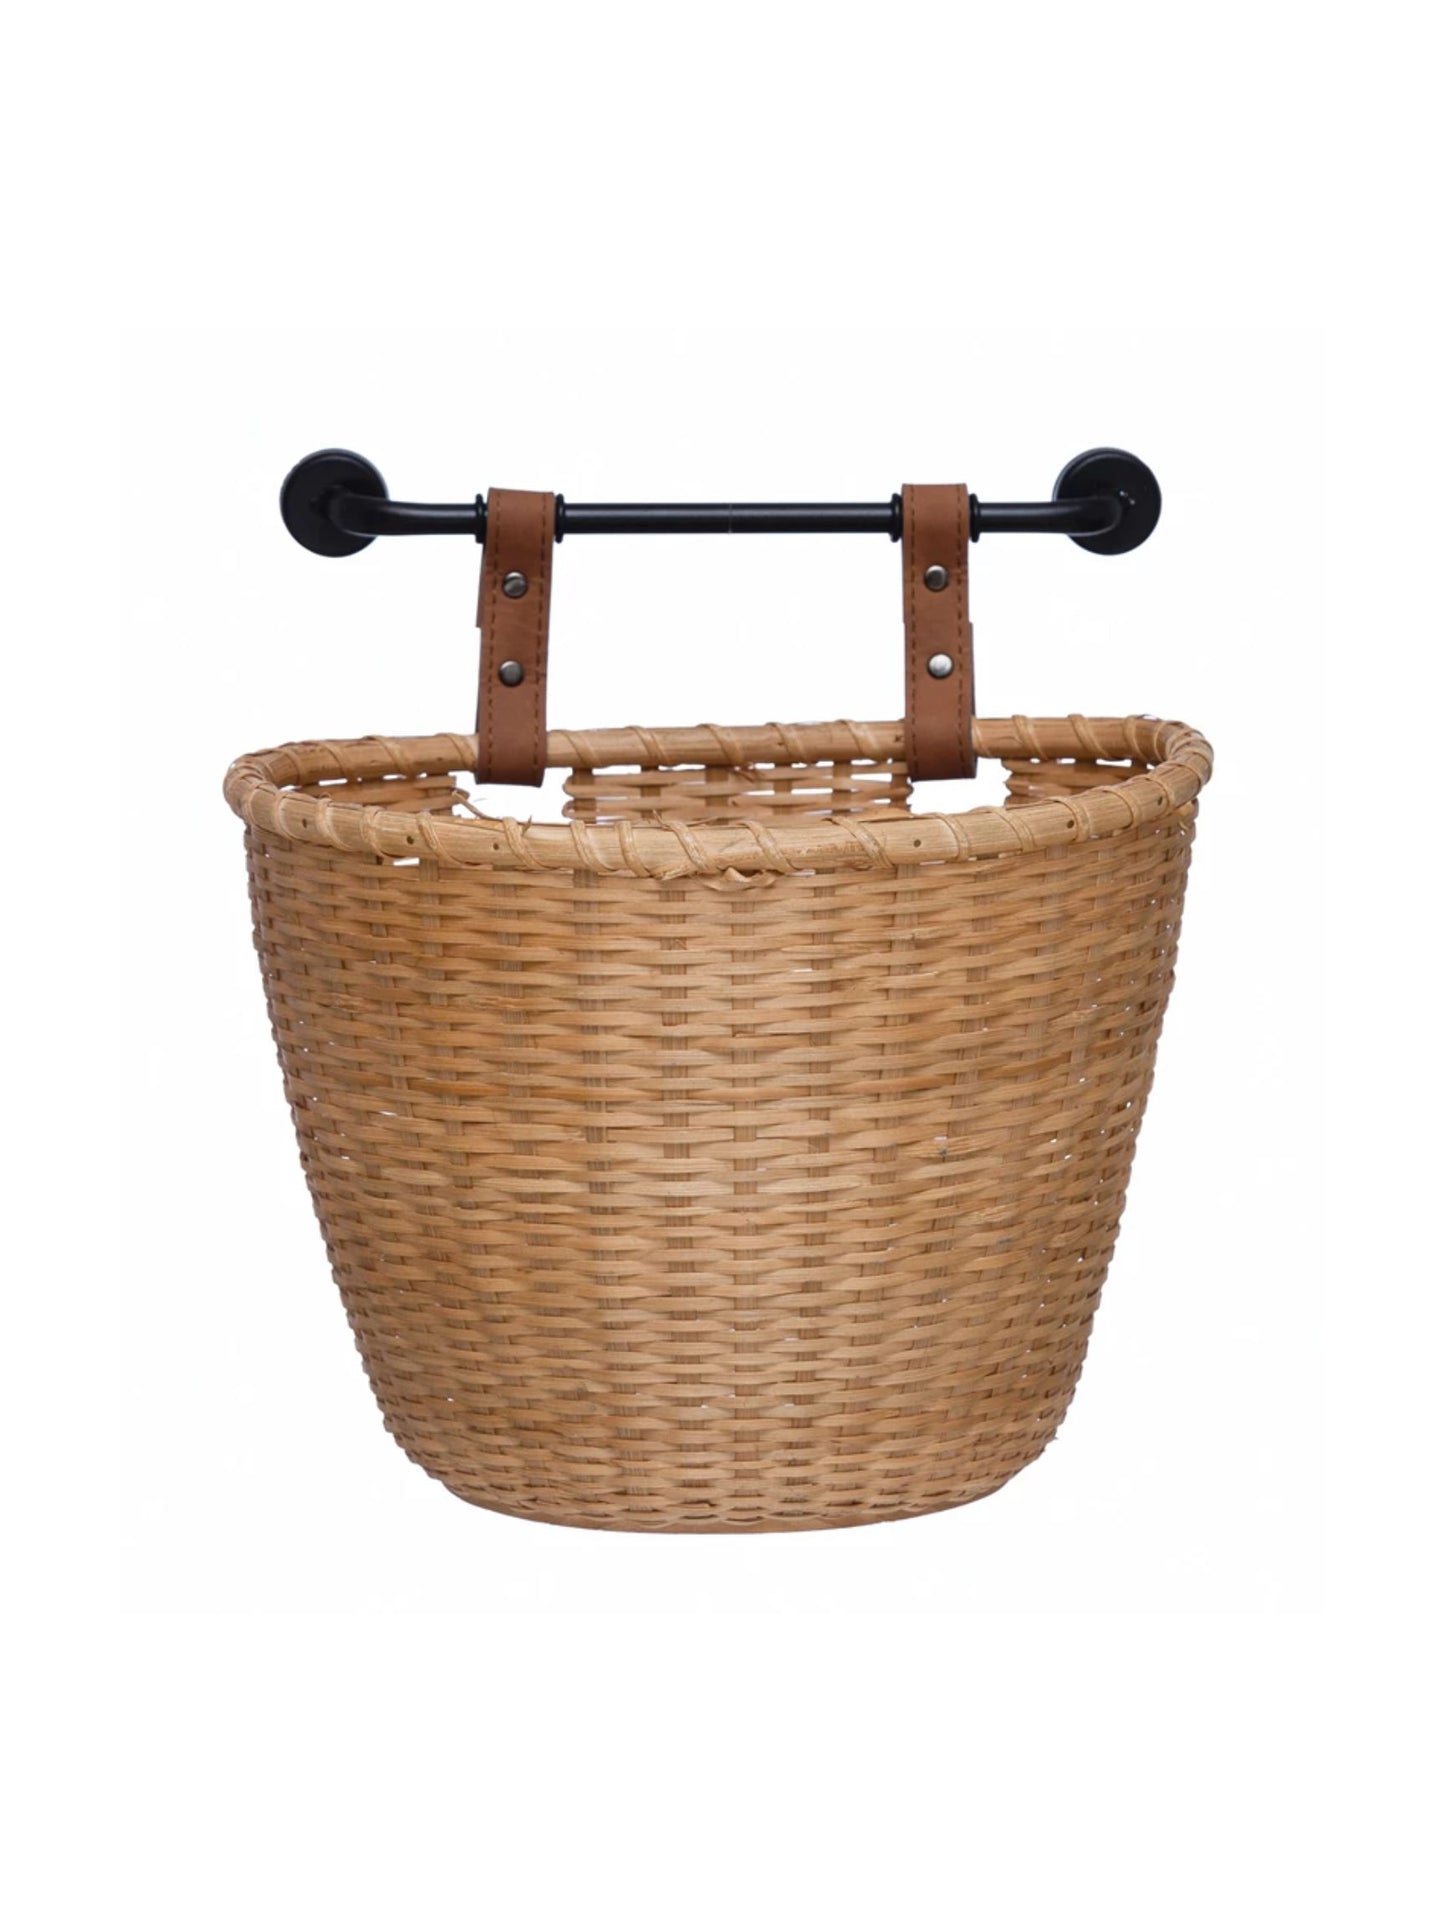 Hand-Woven Bamboo Wall Basket w/ Metal Bracket (PICK UP ONLY)